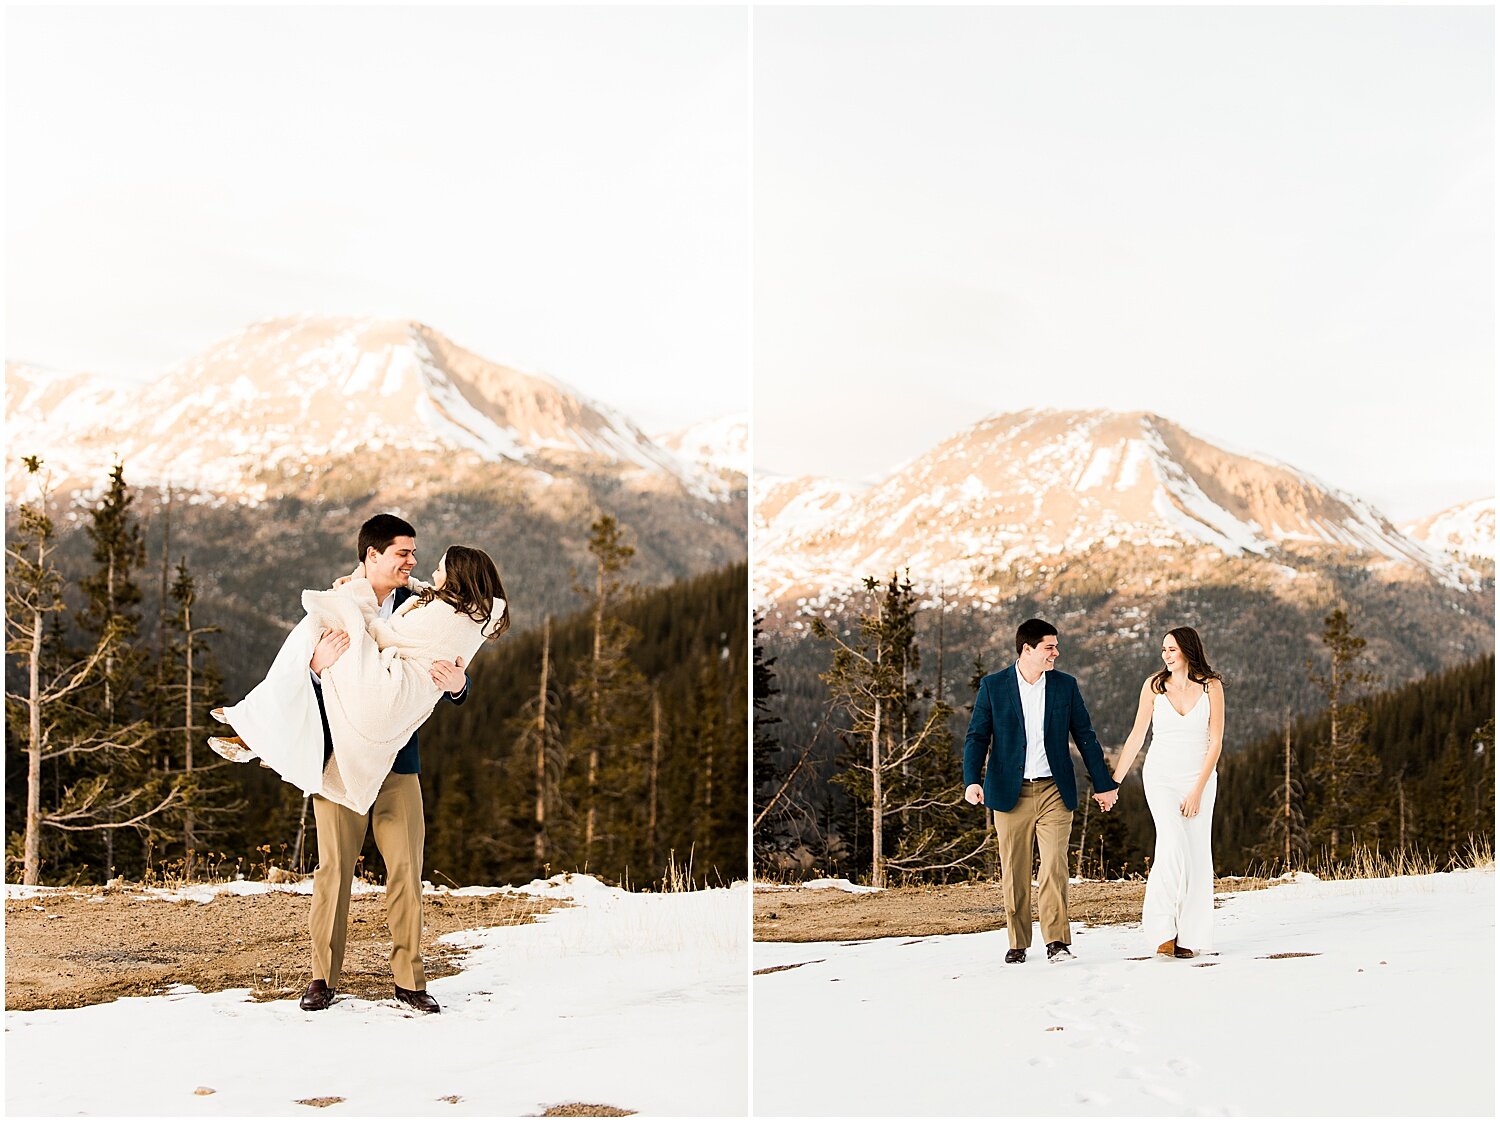 Continental-Divide-Engagement-Photography-Dillon-Colorado-Photographer-Winter-Engaged-07.jpg